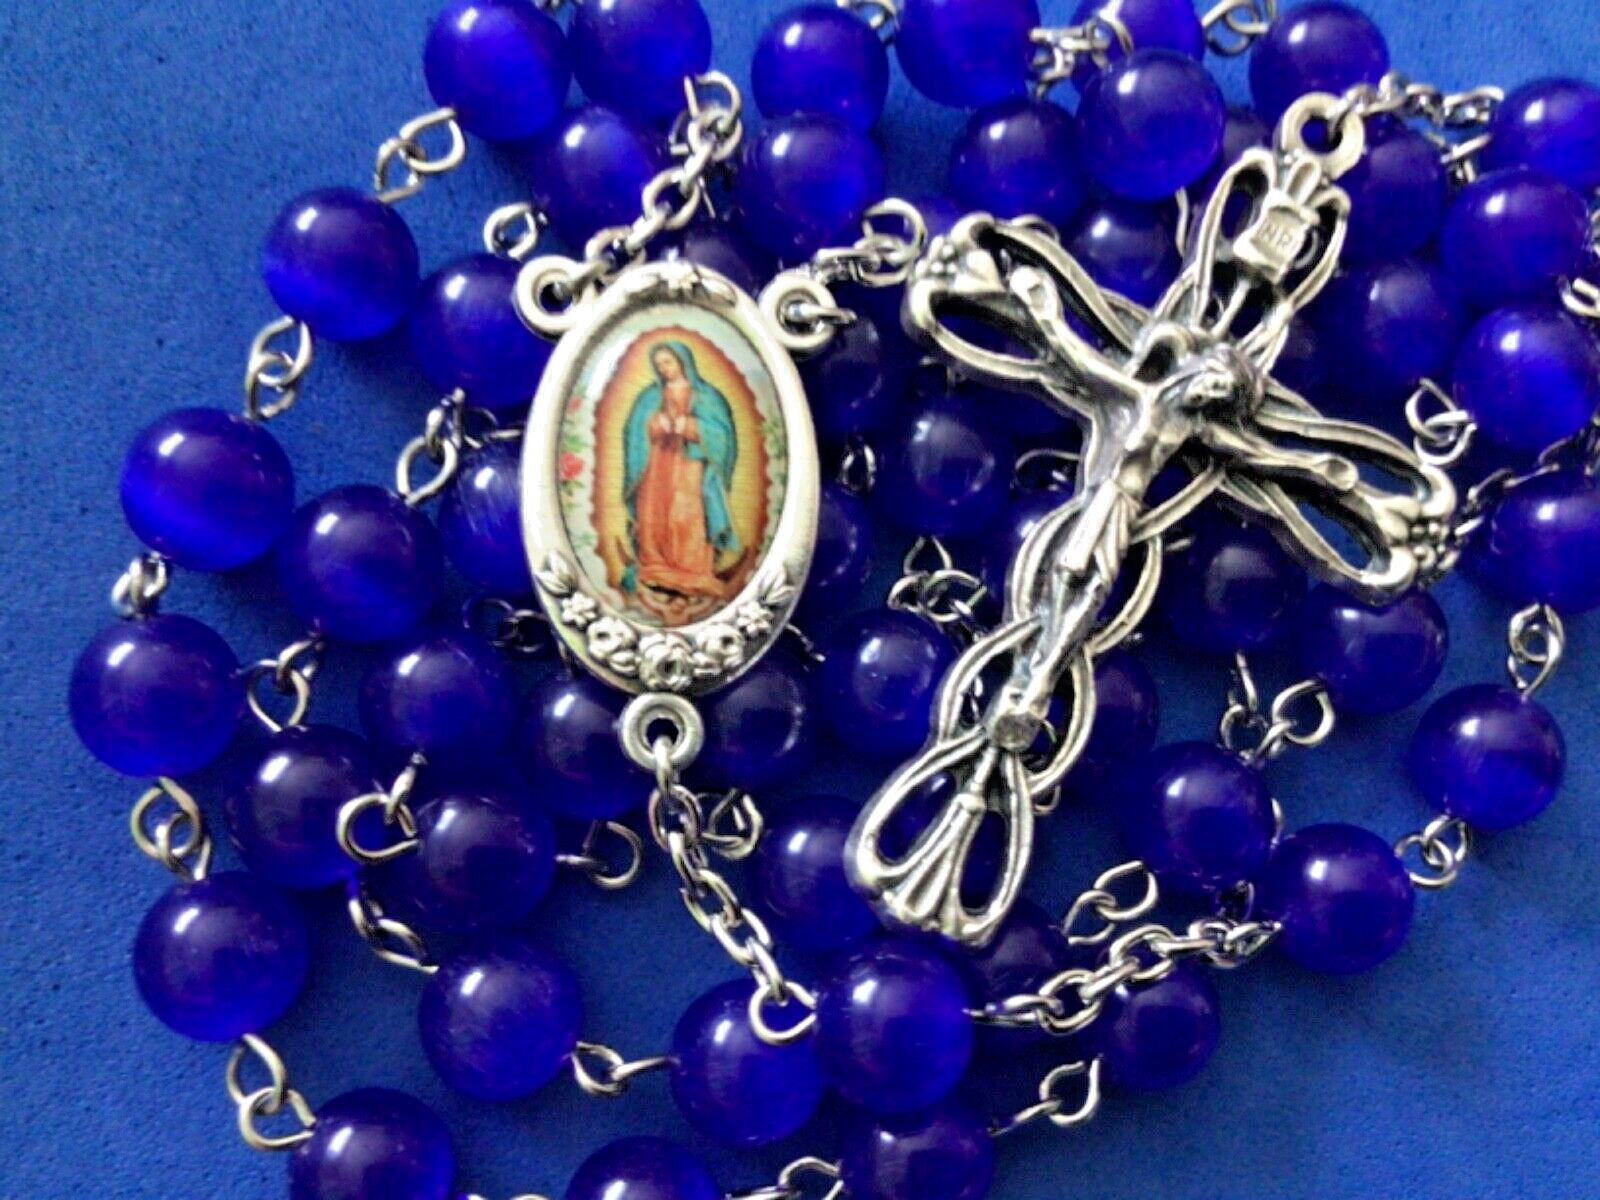 Cobalt Blue Cats Eye Glass Rosary Our Lady of Guadalupe 5 Decade Handmade 8mm